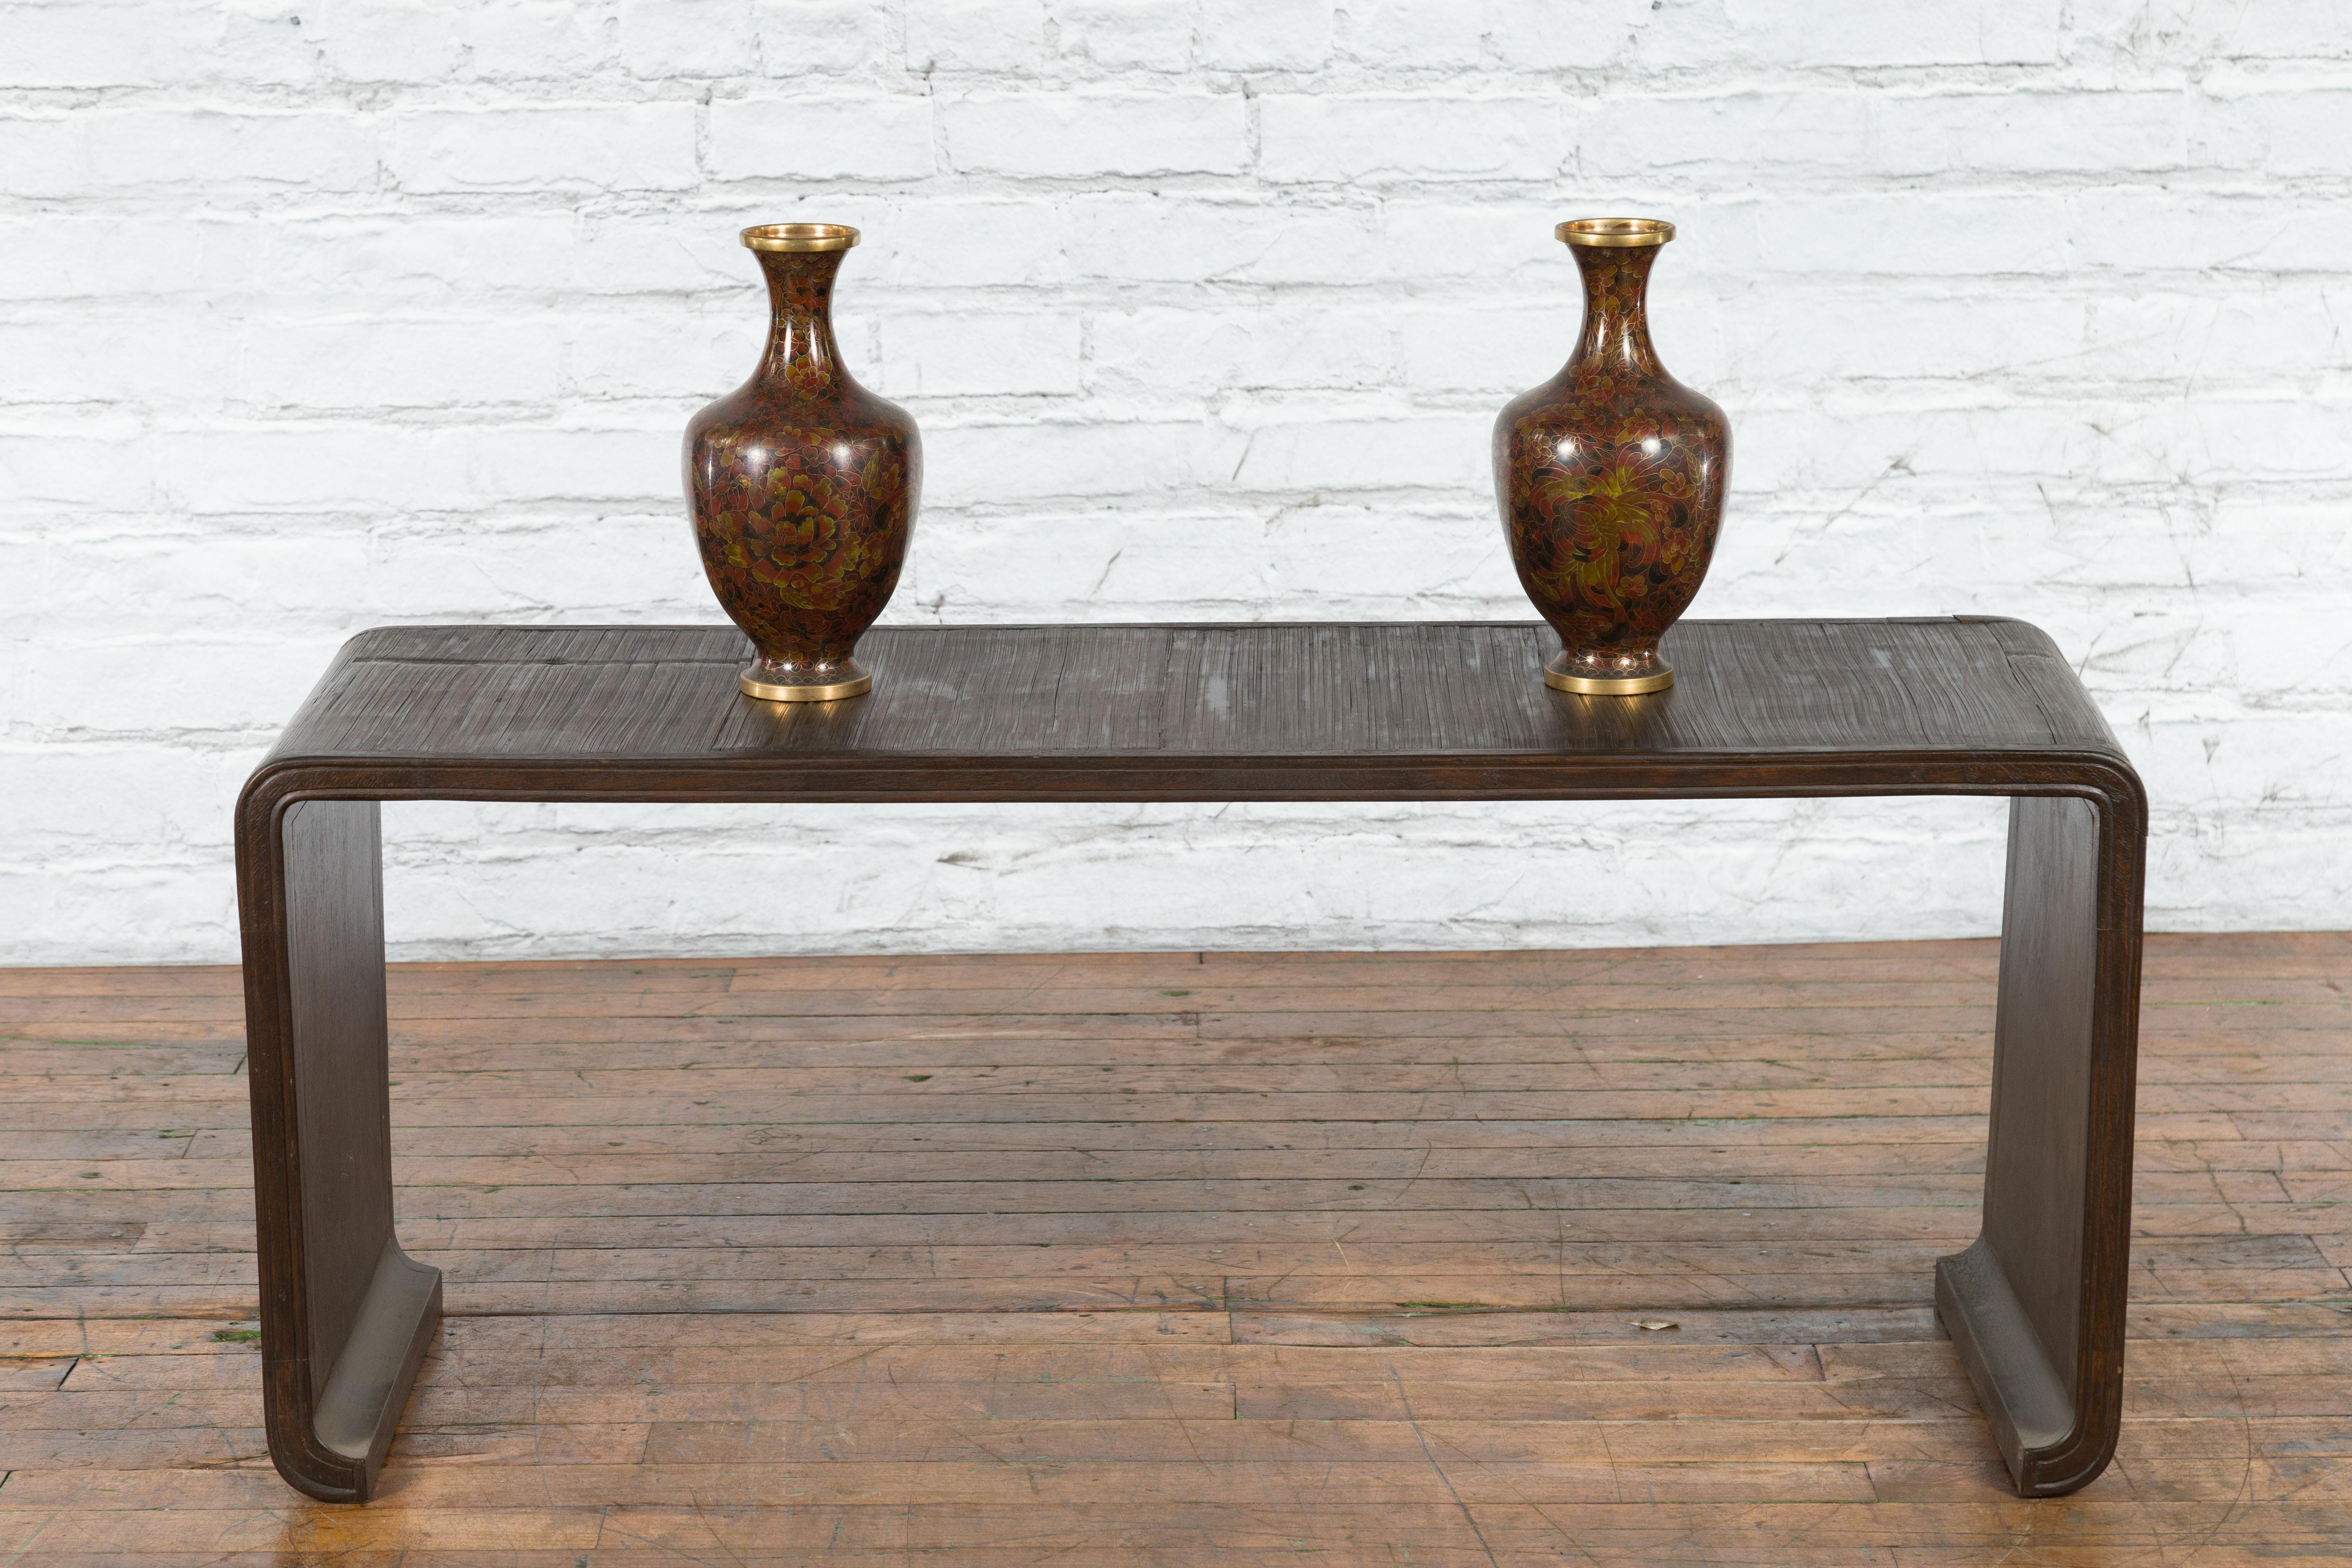 A vintage Burmese waterfall wooden coffee table from the mid-20th century with bamboo opium mat top, scrolling extremities and dark patina. Created in Burma during the midcentury period, this waterfall coffee table features a rectangular bamboo